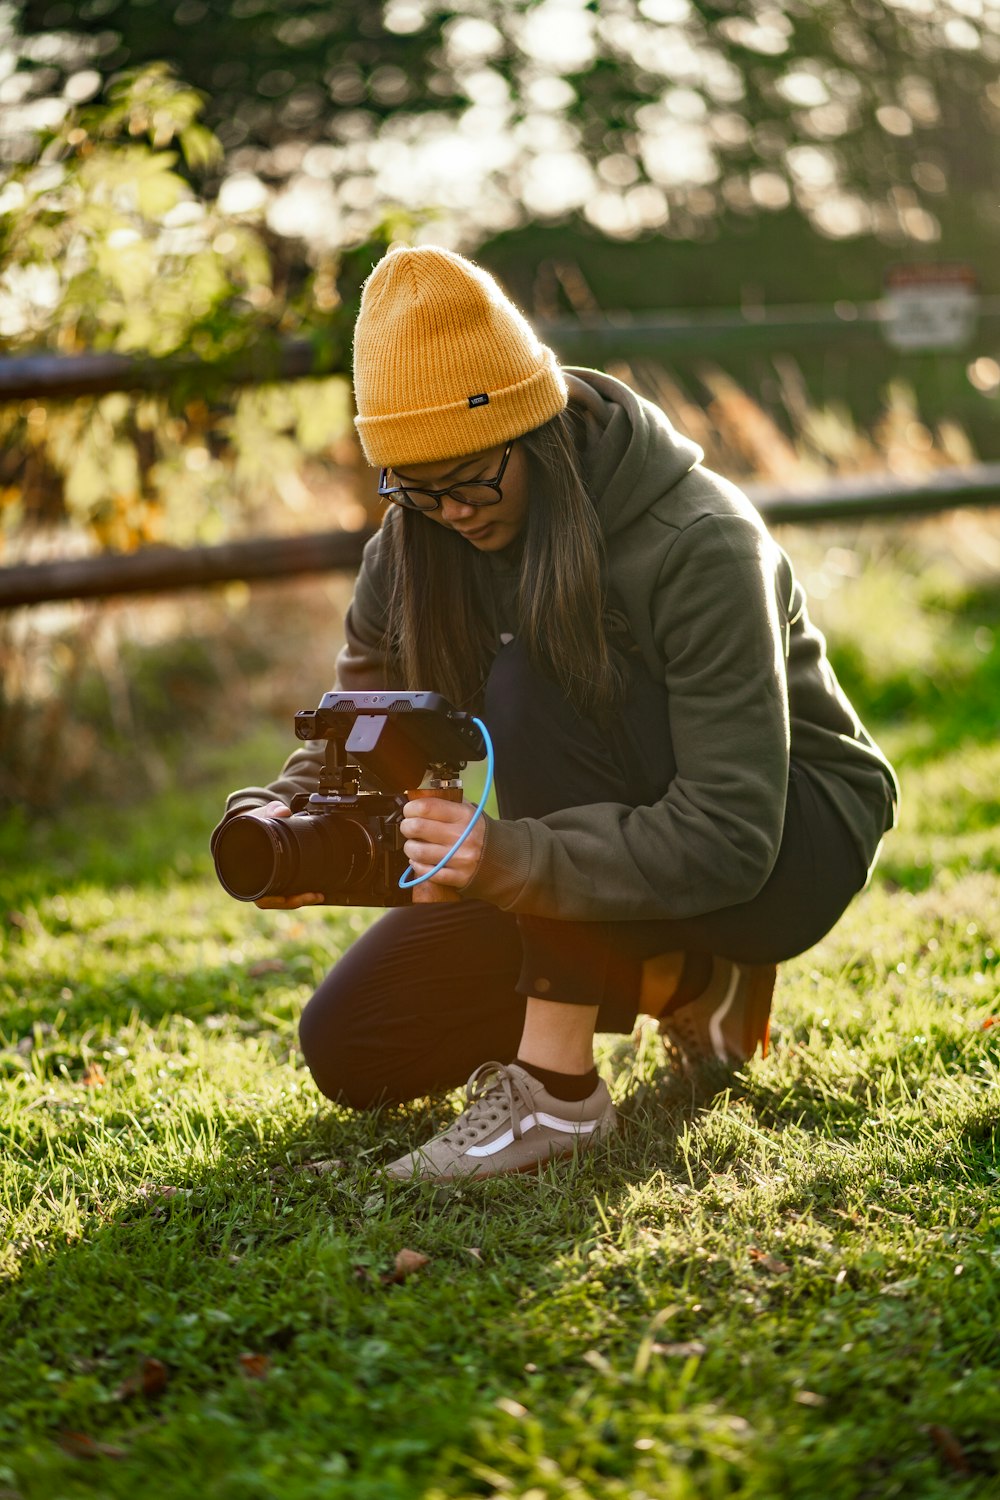 a woman kneeling down while holding a camera